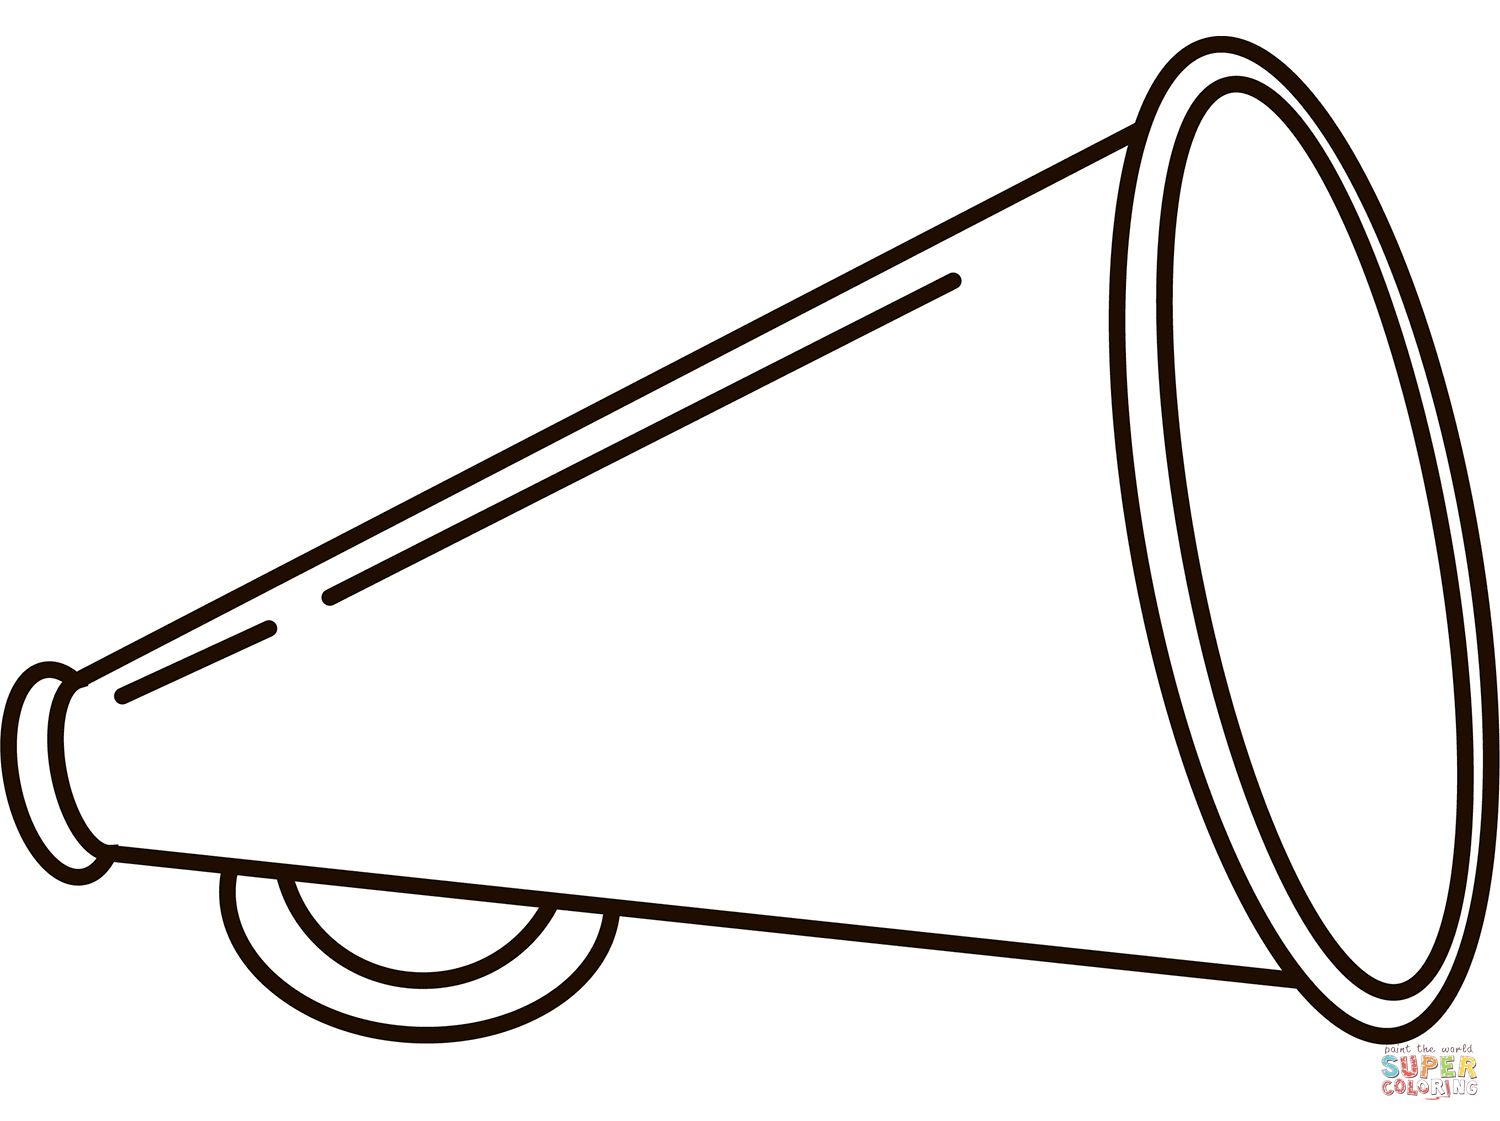 Cheerleading megaphone coloring page free printable coloring pages